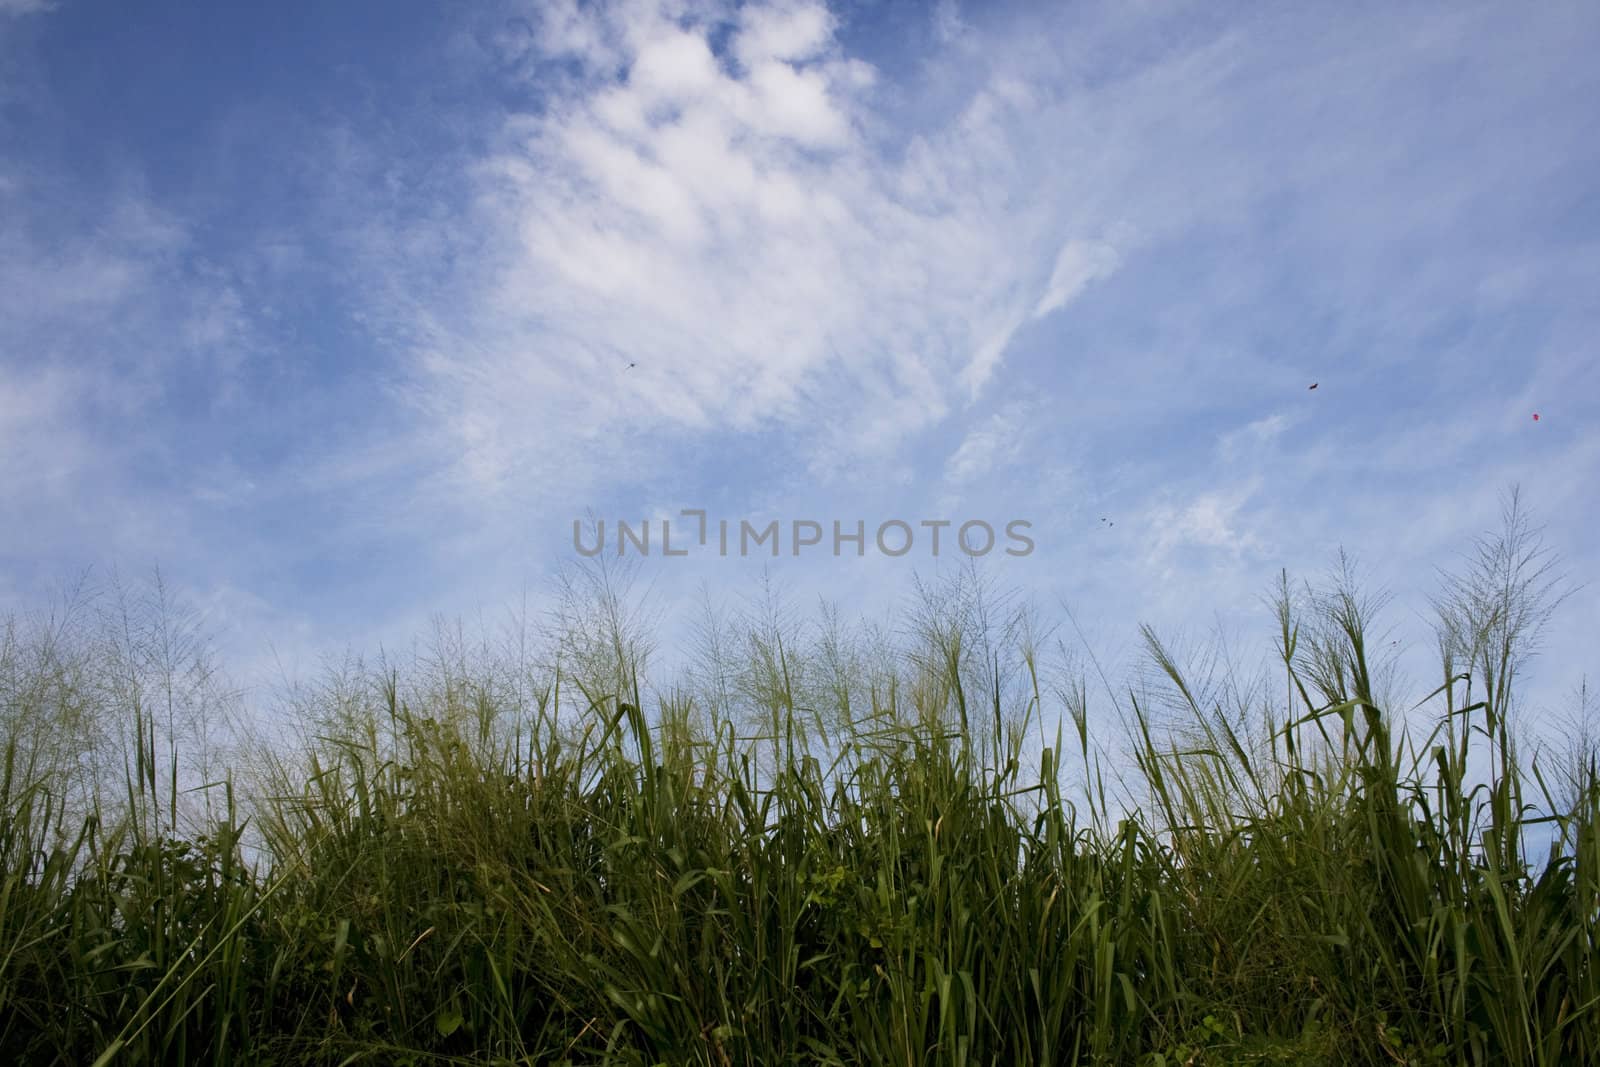 Grass and sky show the beautiful of nature. Can be use as background in Design.